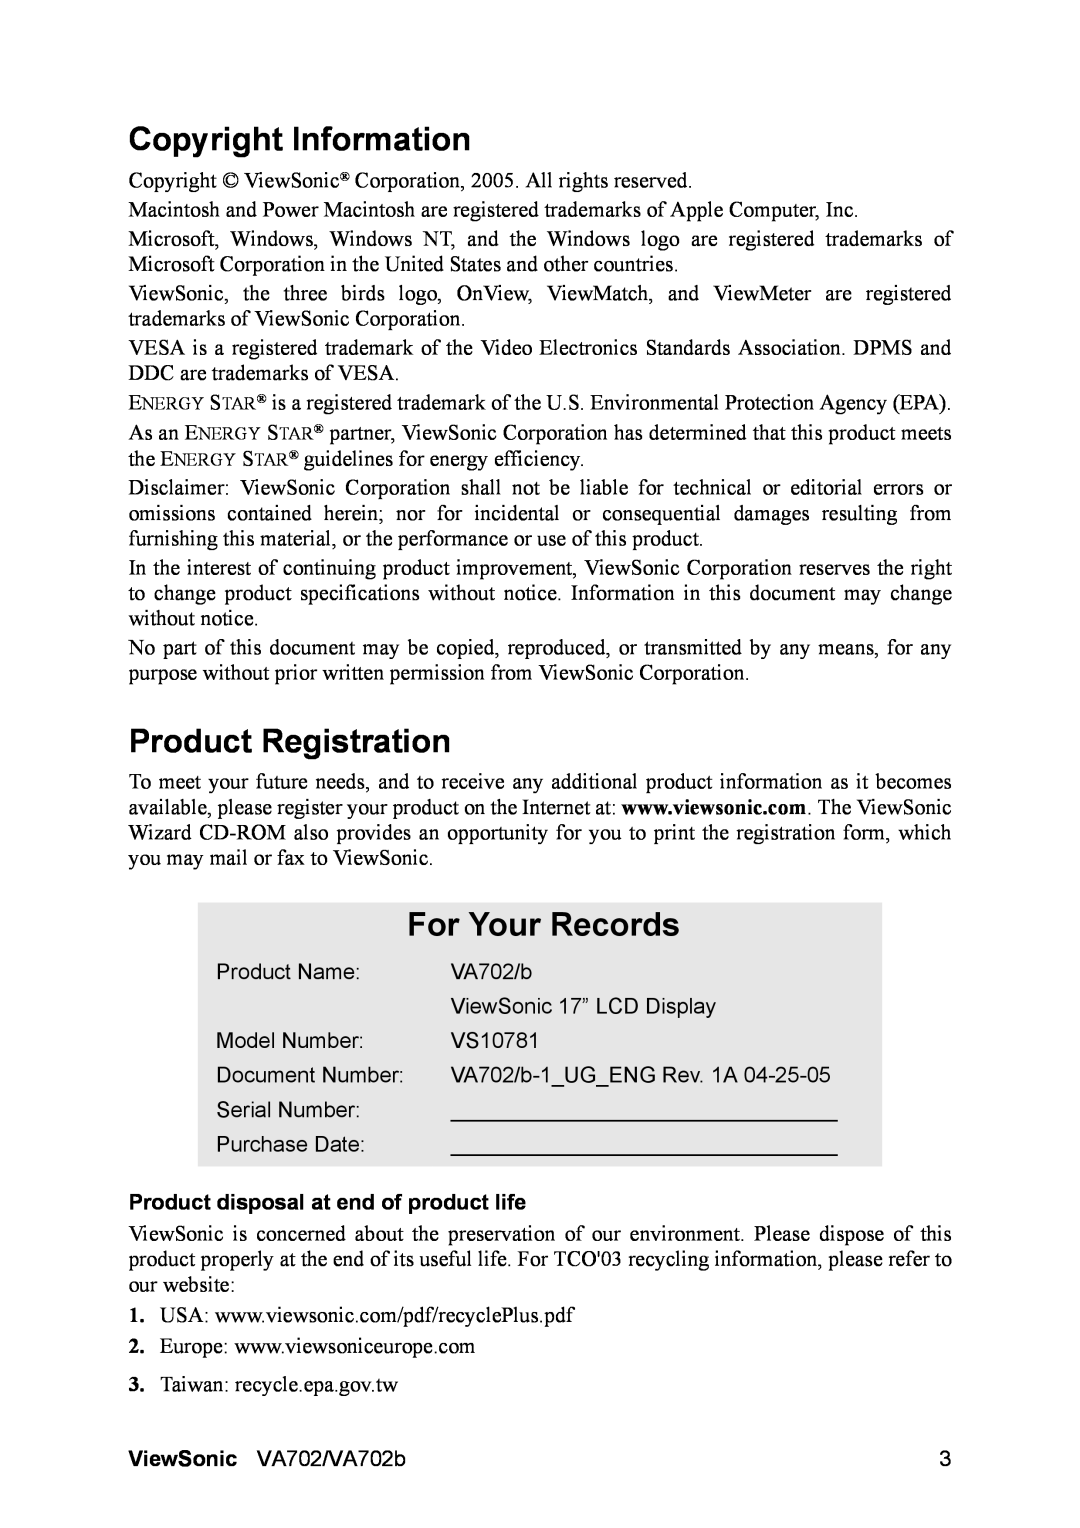 ViewSonic VA702 Copyright Information, Product Registration, For Your Records, Product disposal at end of product life 